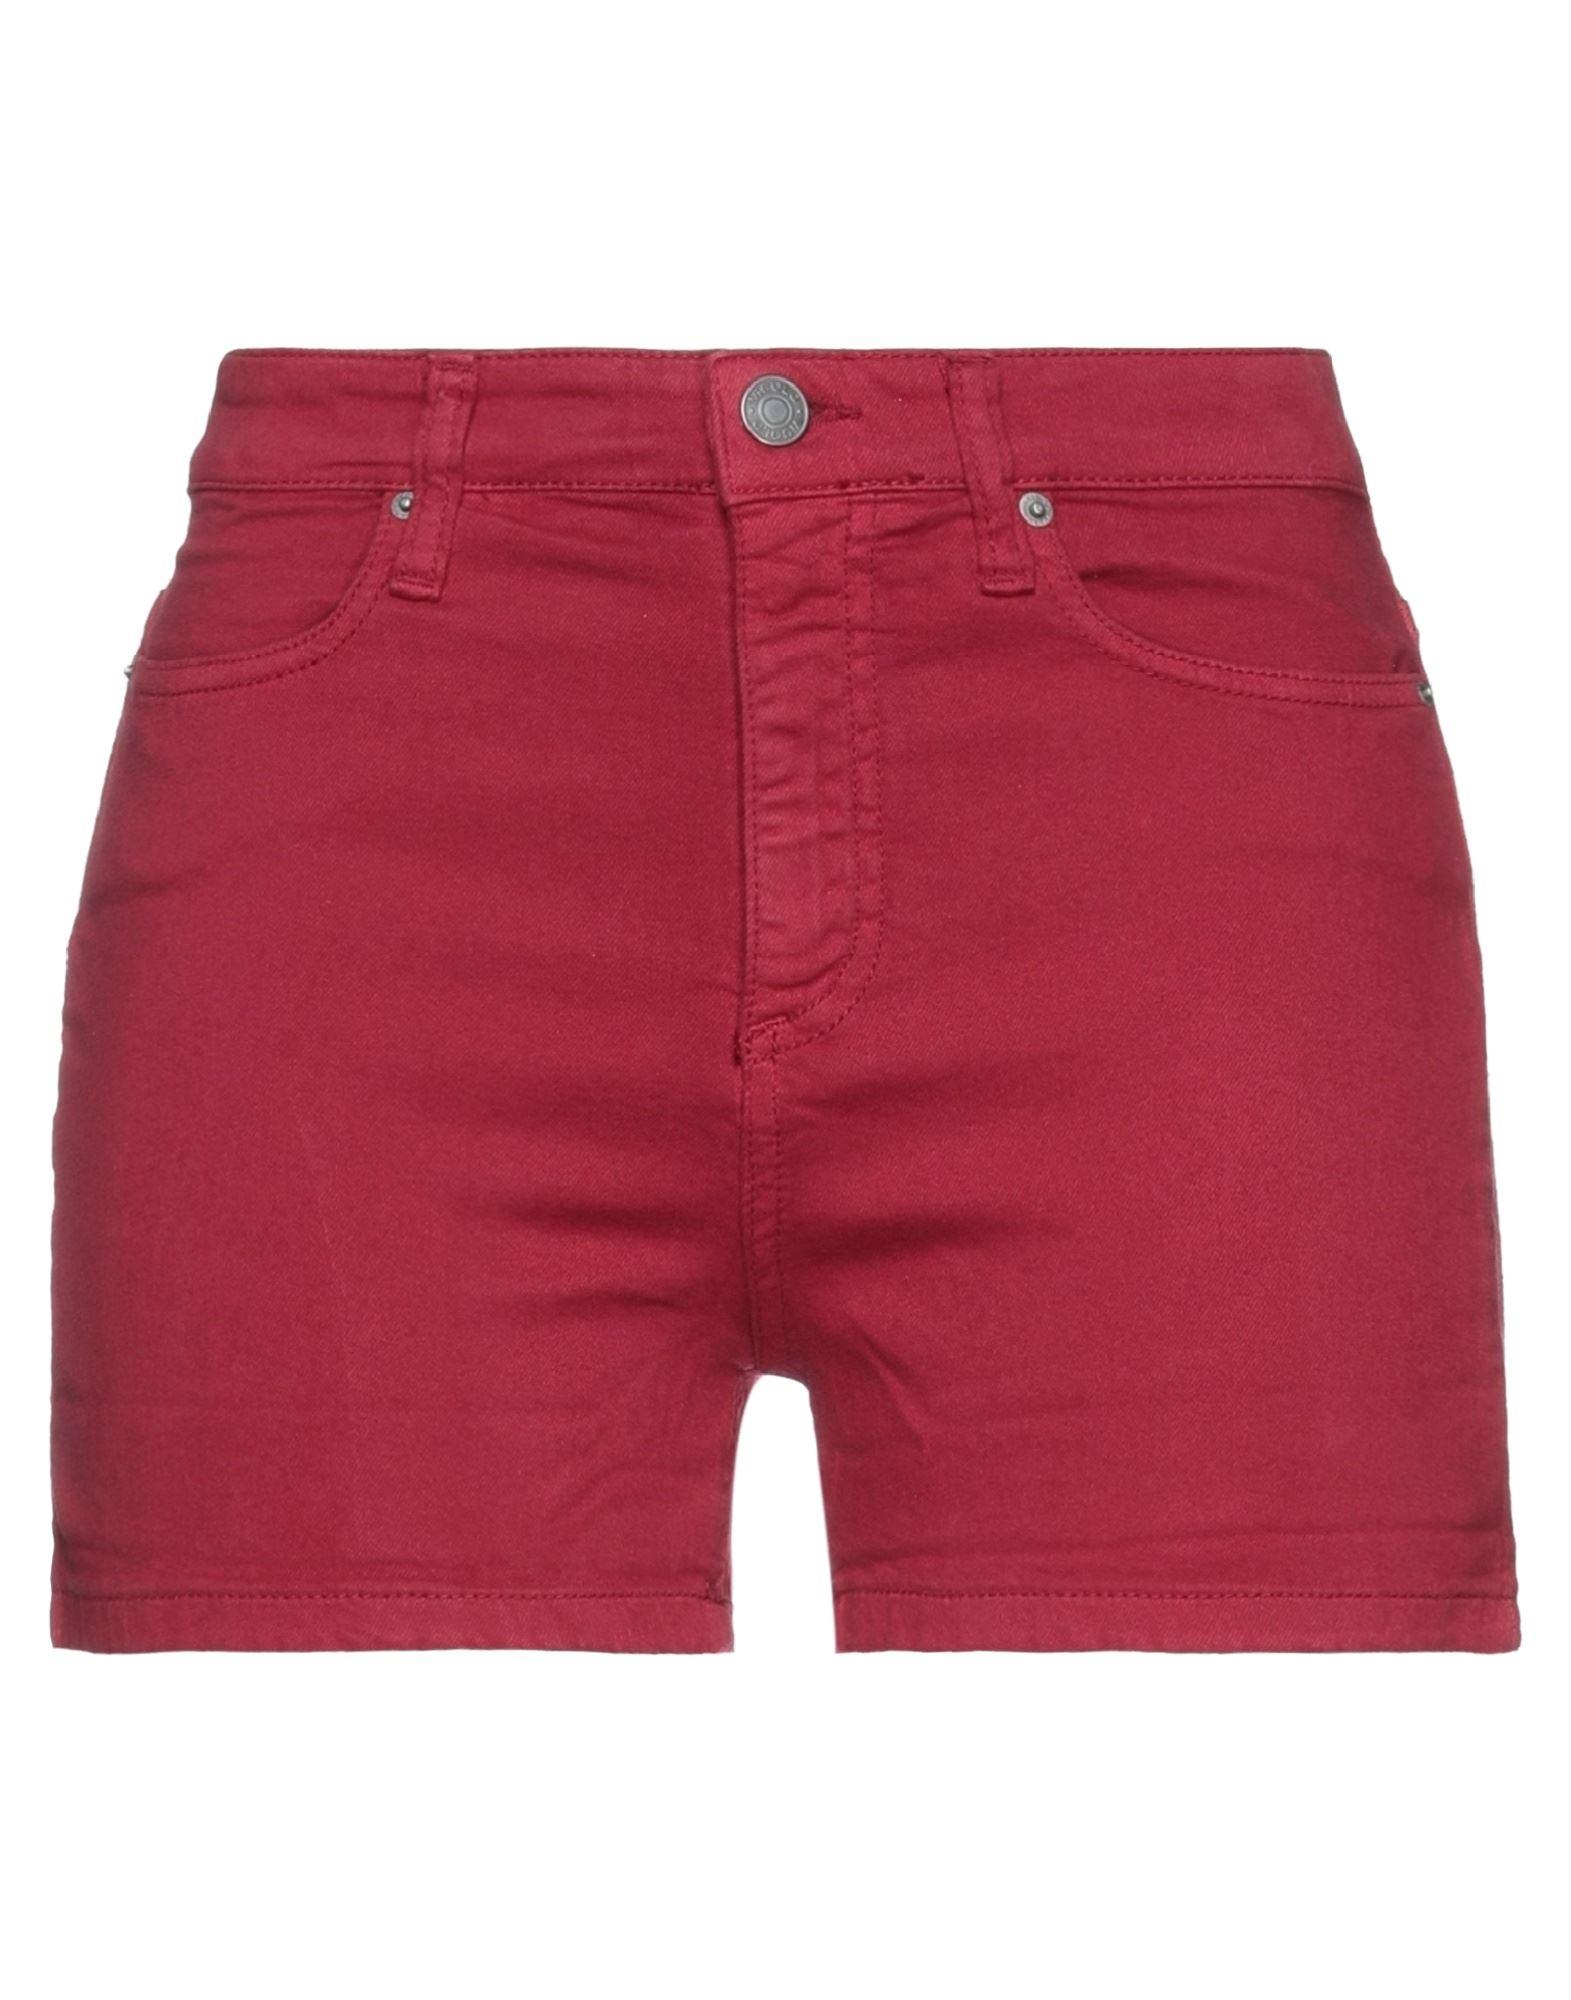 ViCOLO Cotton Shorts & Bermuda Shorts in Maroon (Red) - Lyst